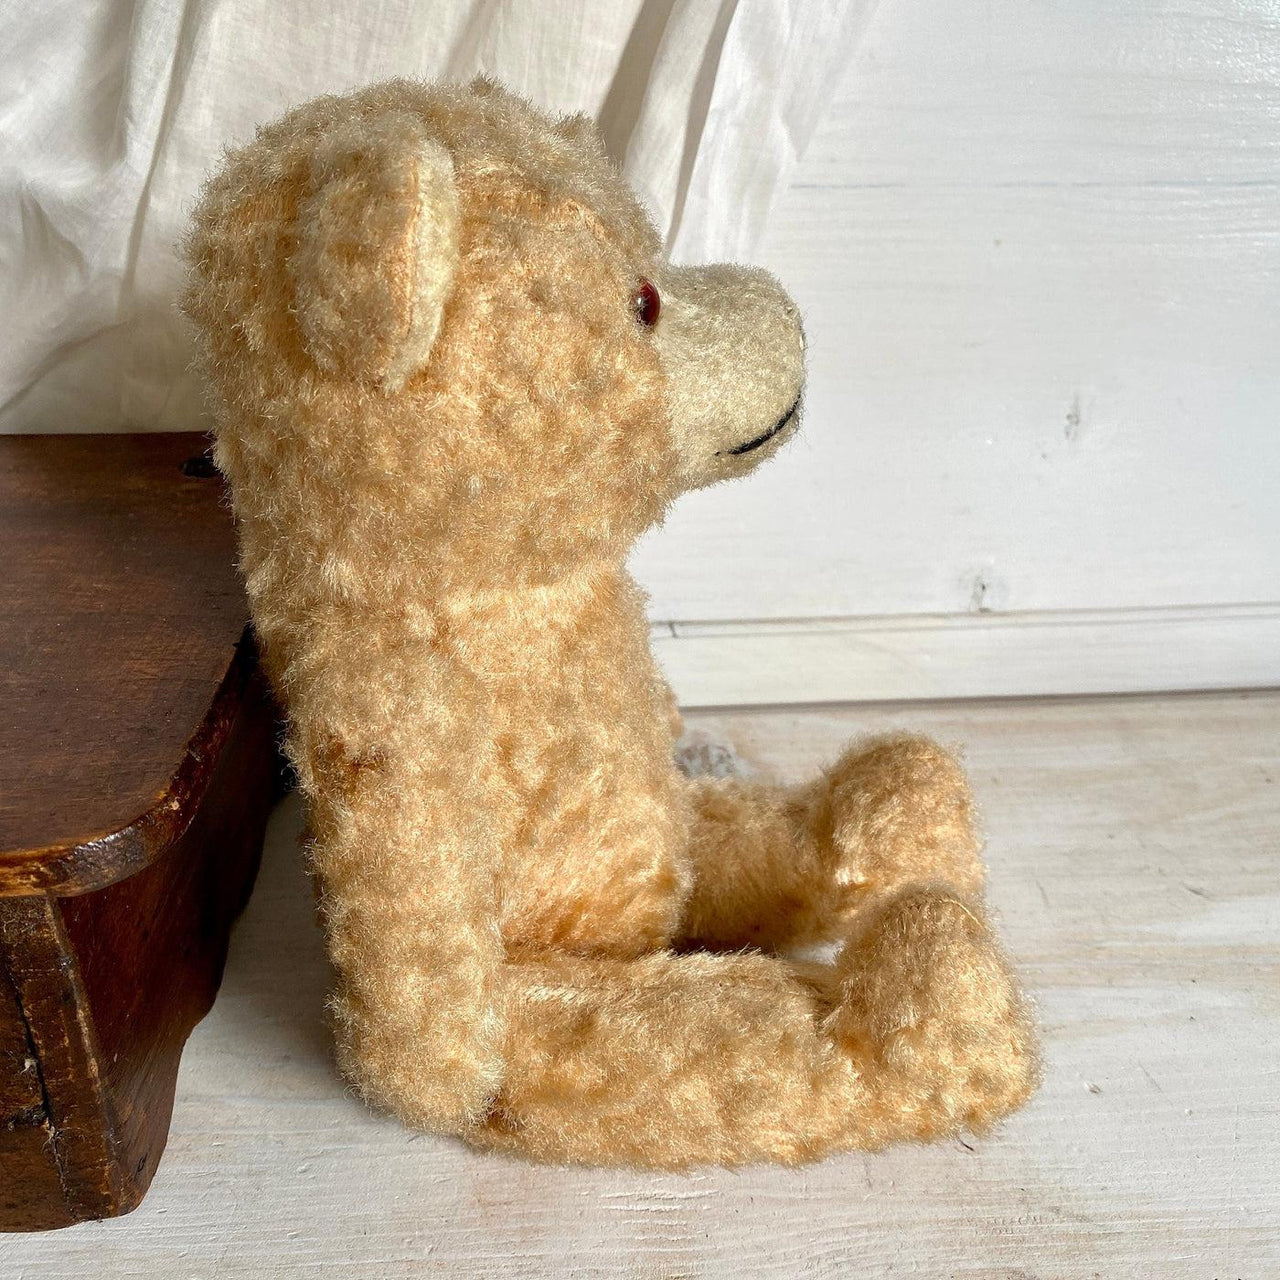 https://cdn.shopify.com/s/files/1/0381/0207/3482/products/vintage-Antique-jointed-teddy-bear-straw-filled-Germany-1940s-SweetAntik-2.jpg?v=1674991255&width=1280